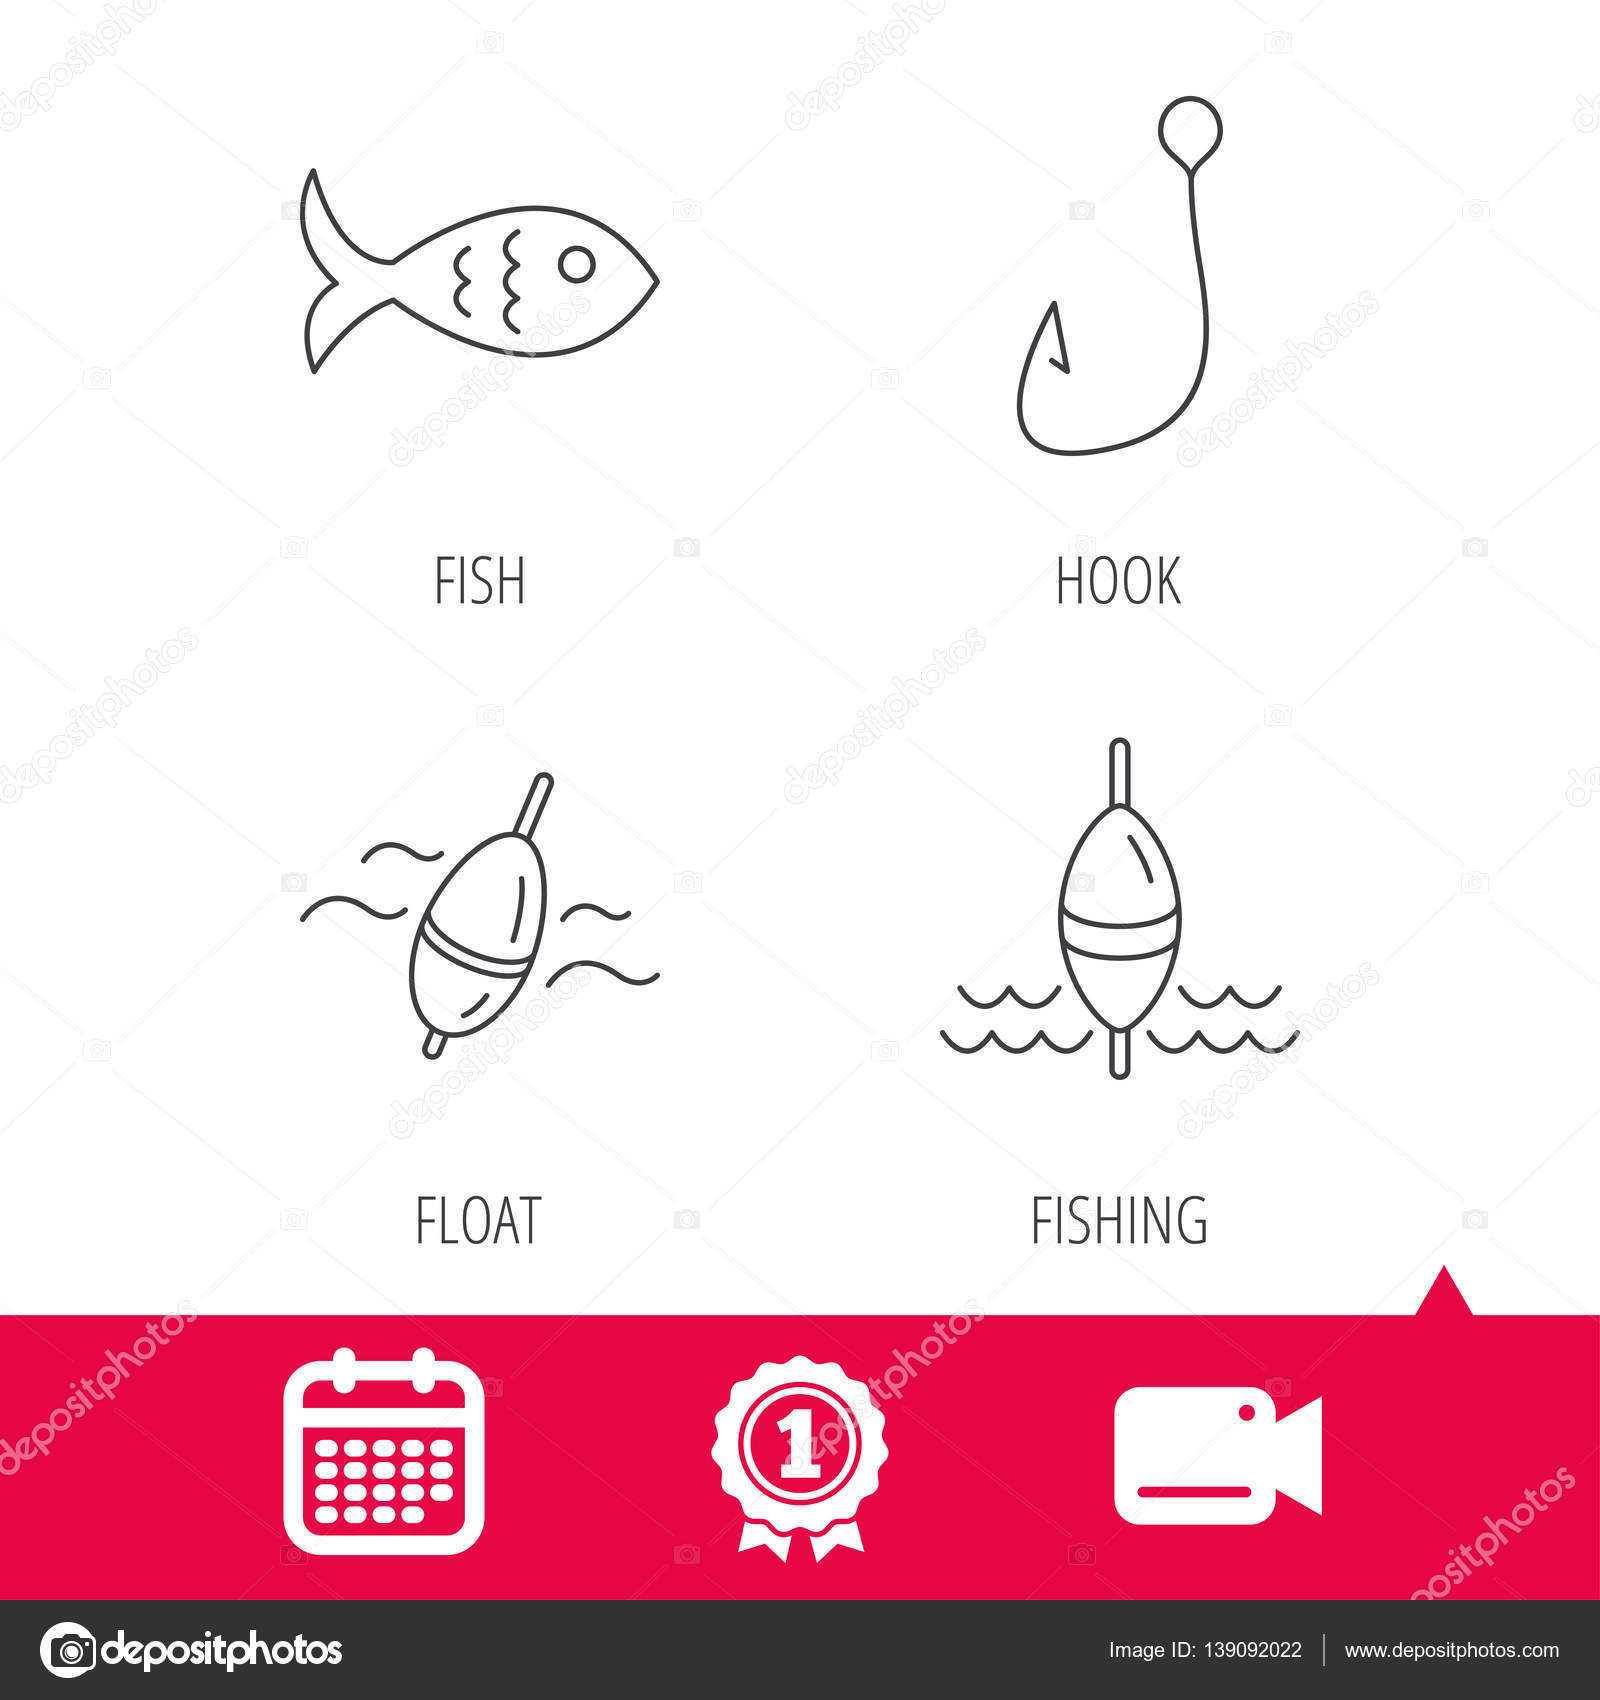 Fishing hook and float icons. — Stock Vector © Tanyastock #139092022